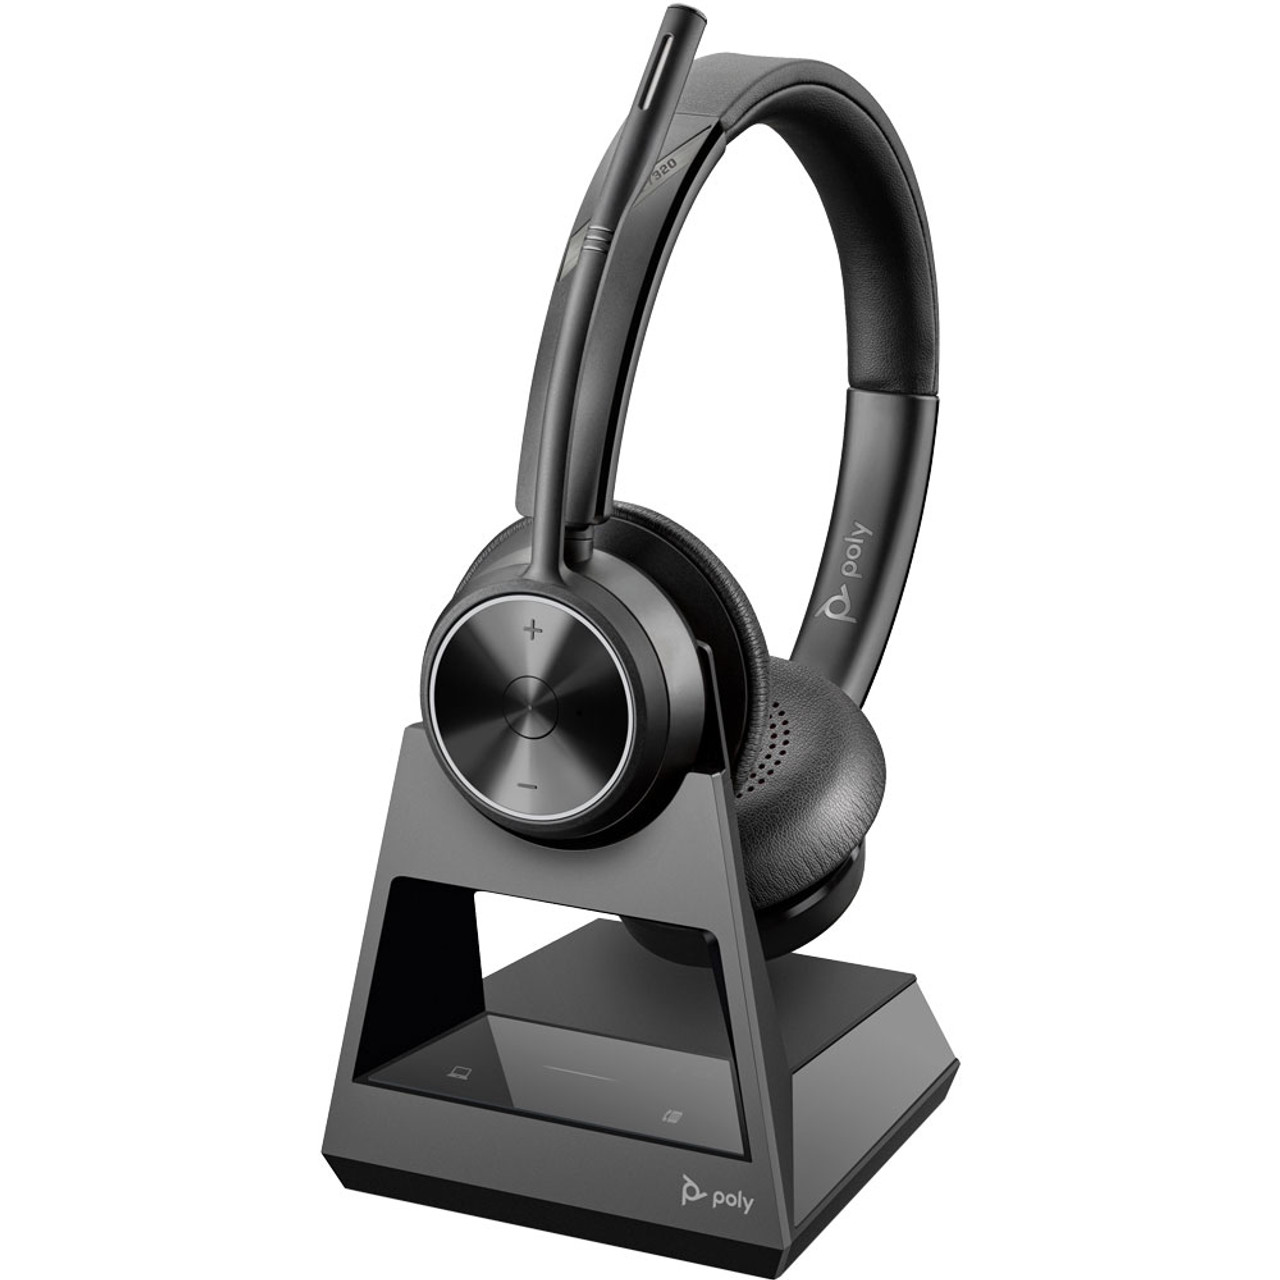 Poly Savi 7320 Office 214777-01 DECT Headset Wireless Stereo 